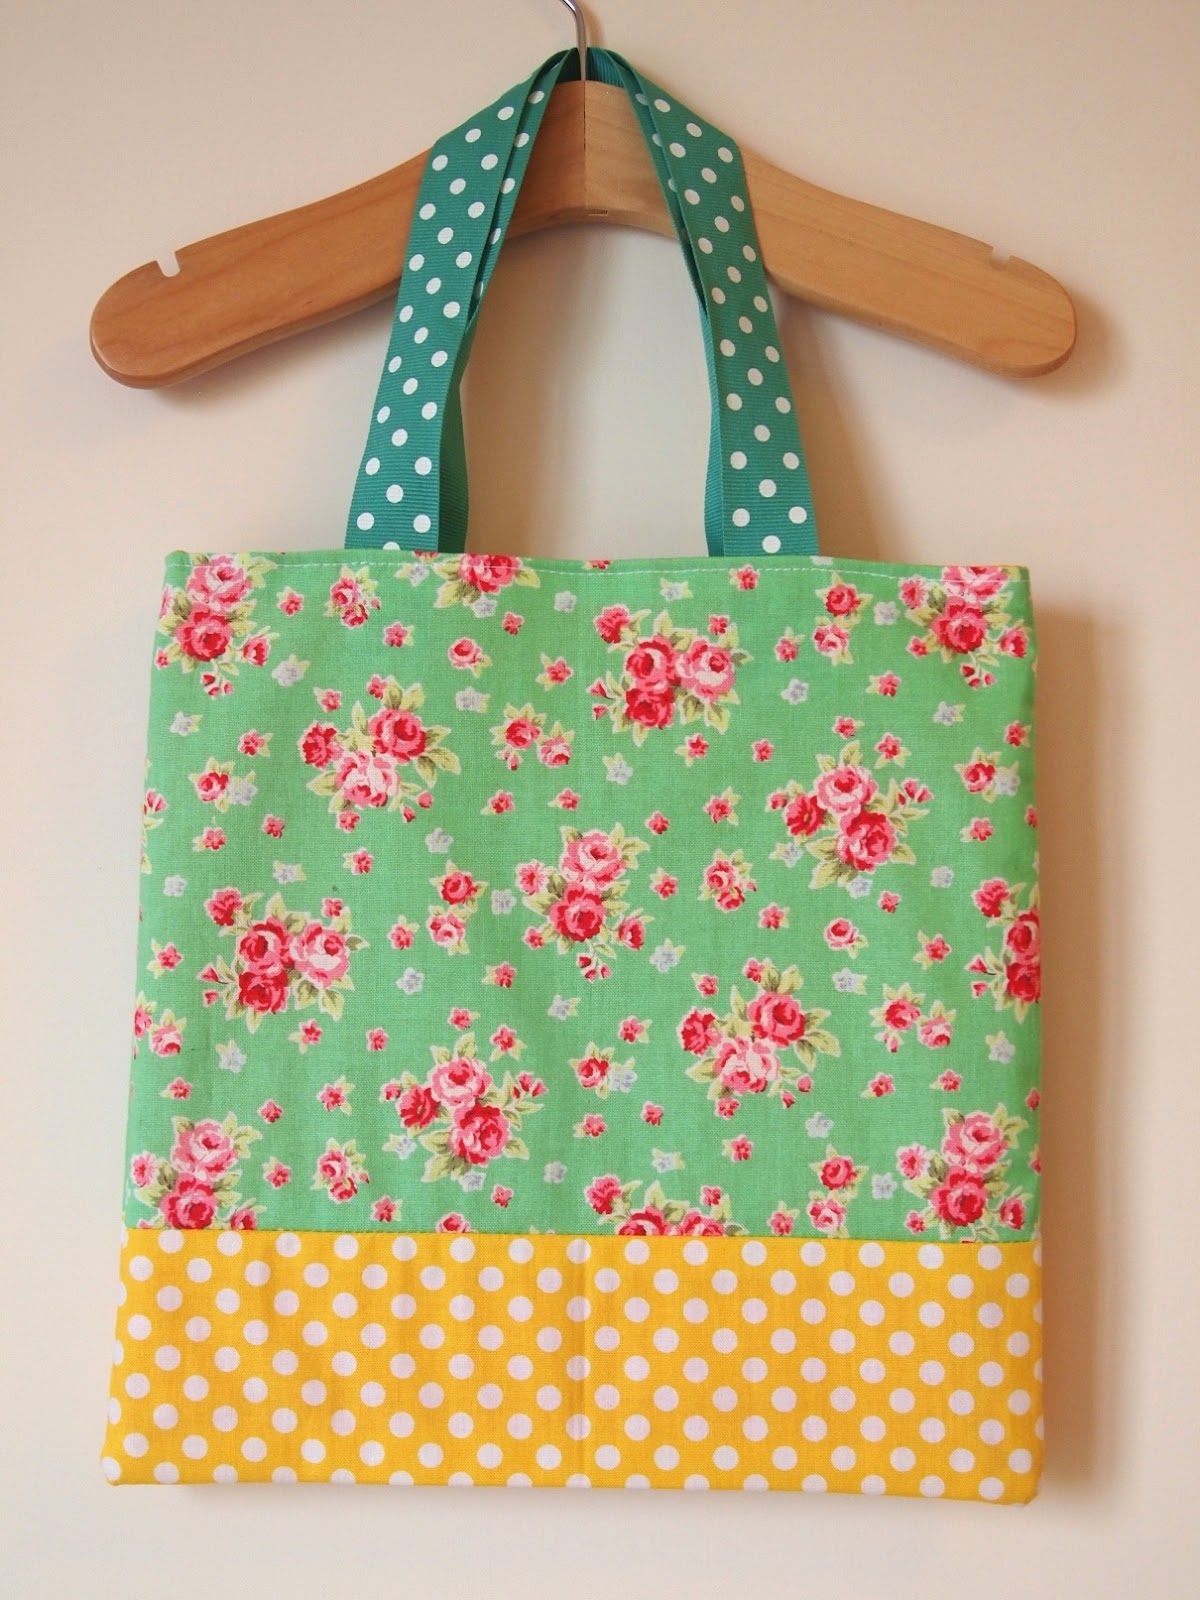 sew sew n sew: Shop Update: 2 Small patchwork tote bags